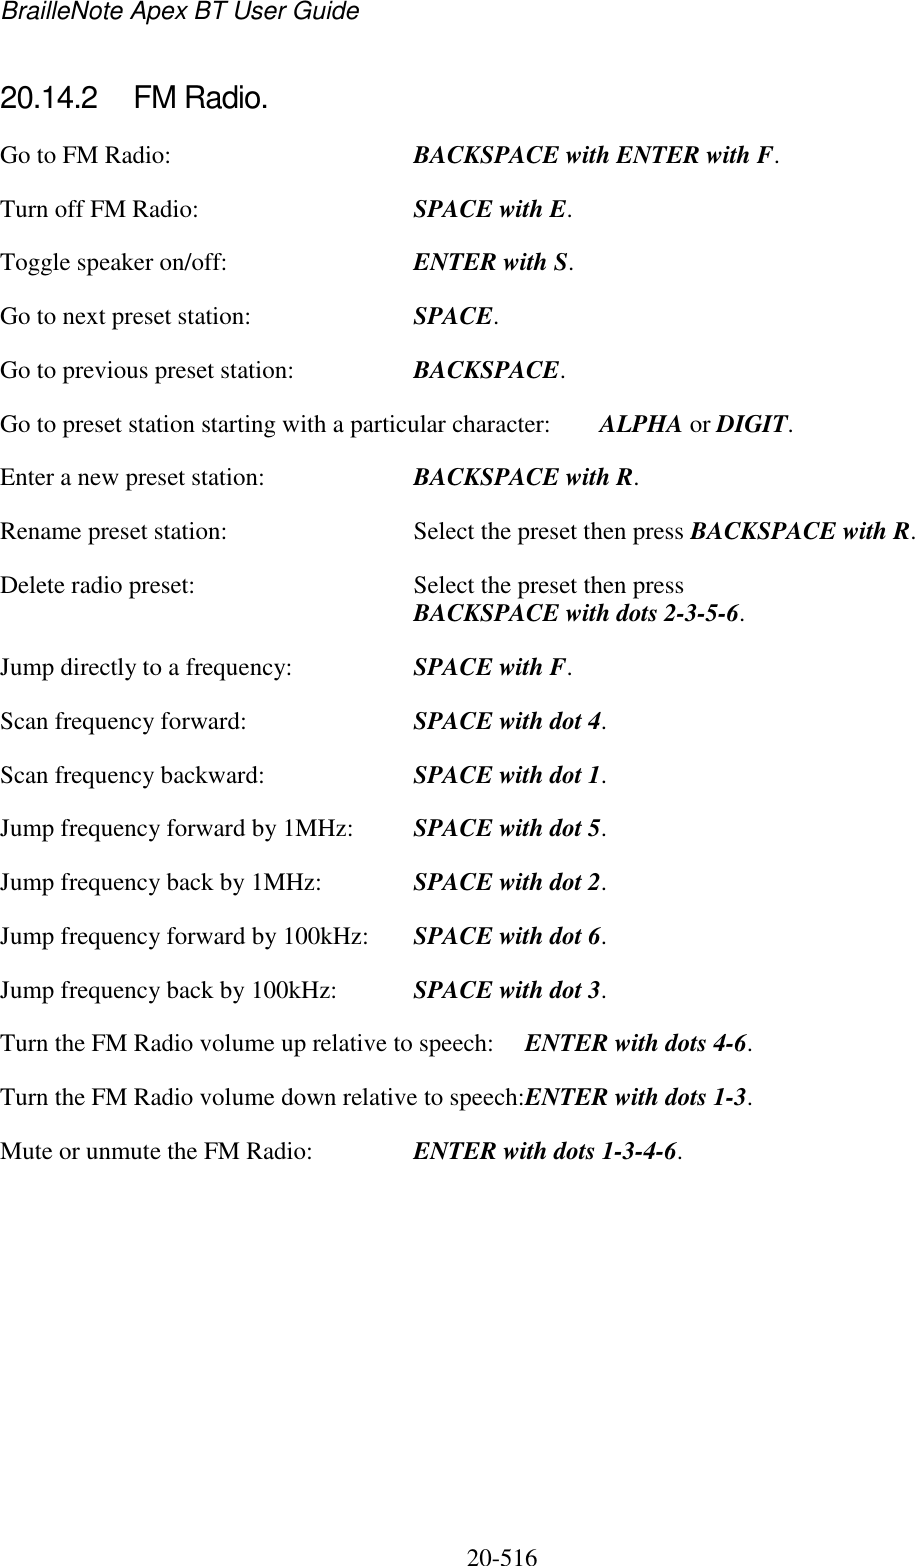 BrailleNote Apex BT User Guide   20-516   20.14.2  FM Radio. Go to FM Radio:  BACKSPACE with ENTER with F. Turn off FM Radio:  SPACE with E. Toggle speaker on/off:  ENTER with S. Go to next preset station:  SPACE. Go to previous preset station:  BACKSPACE. Go to preset station starting with a particular character:  ALPHA or DIGIT. Enter a new preset station:  BACKSPACE with R. Rename preset station:  Select the preset then press BACKSPACE with R.   Delete radio preset:  Select the preset then press BACKSPACE with dots 2-3-5-6. Jump directly to a frequency:  SPACE with F. Scan frequency forward:  SPACE with dot 4. Scan frequency backward:  SPACE with dot 1. Jump frequency forward by 1MHz:  SPACE with dot 5. Jump frequency back by 1MHz:  SPACE with dot 2. Jump frequency forward by 100kHz:  SPACE with dot 6. Jump frequency back by 100kHz:  SPACE with dot 3. Turn the FM Radio volume up relative to speech:  ENTER with dots 4-6. Turn the FM Radio volume down relative to speech:ENTER with dots 1-3. Mute or unmute the FM Radio:  ENTER with dots 1-3-4-6.          